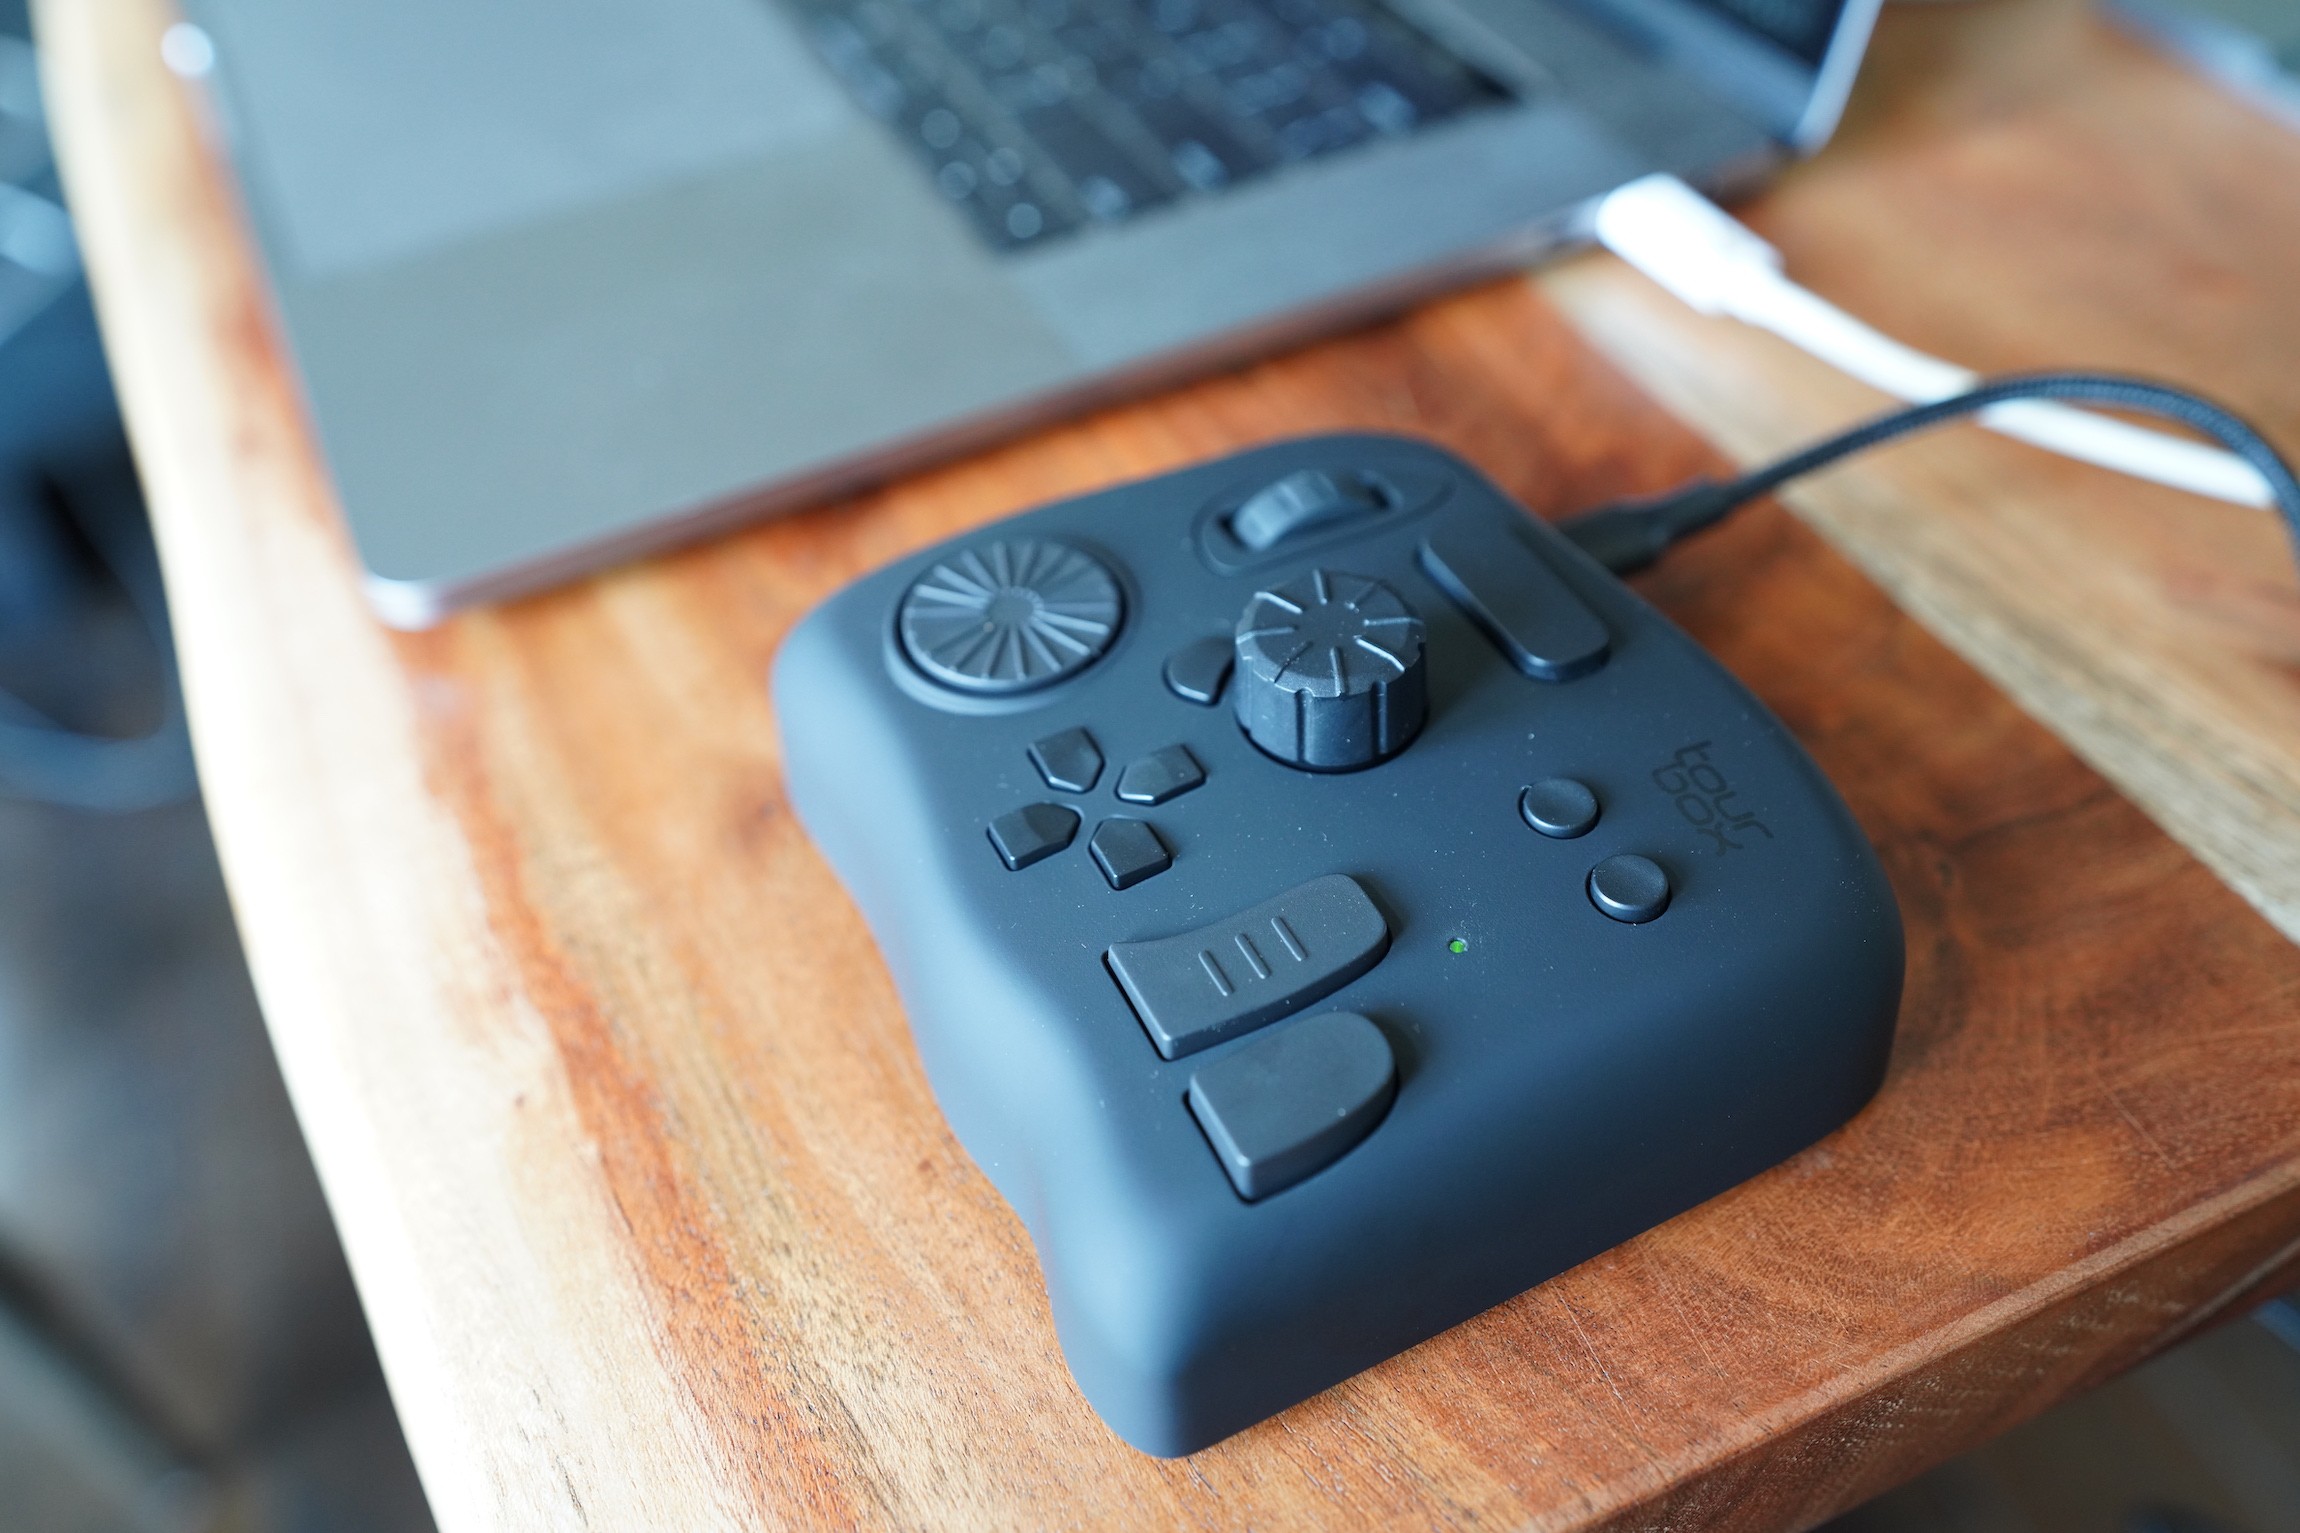 The TourBox adds a touch of tactile control to your editing workflow in a portable package